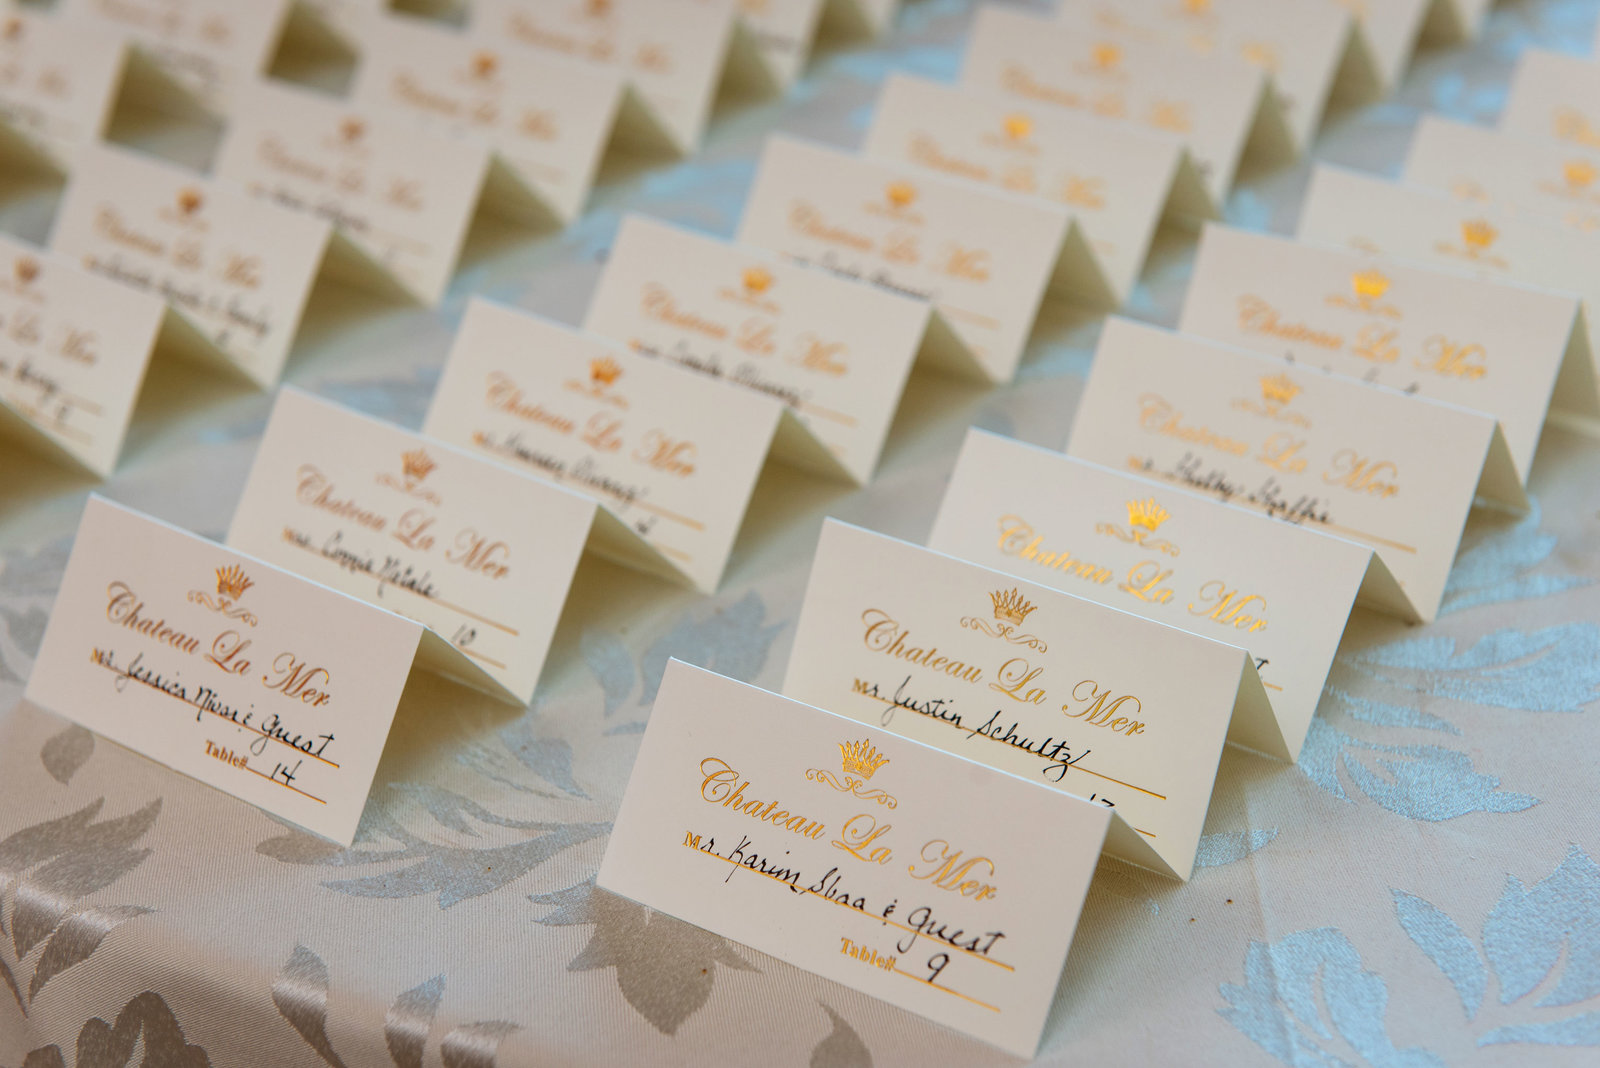 Table cards at Chateau La Mer